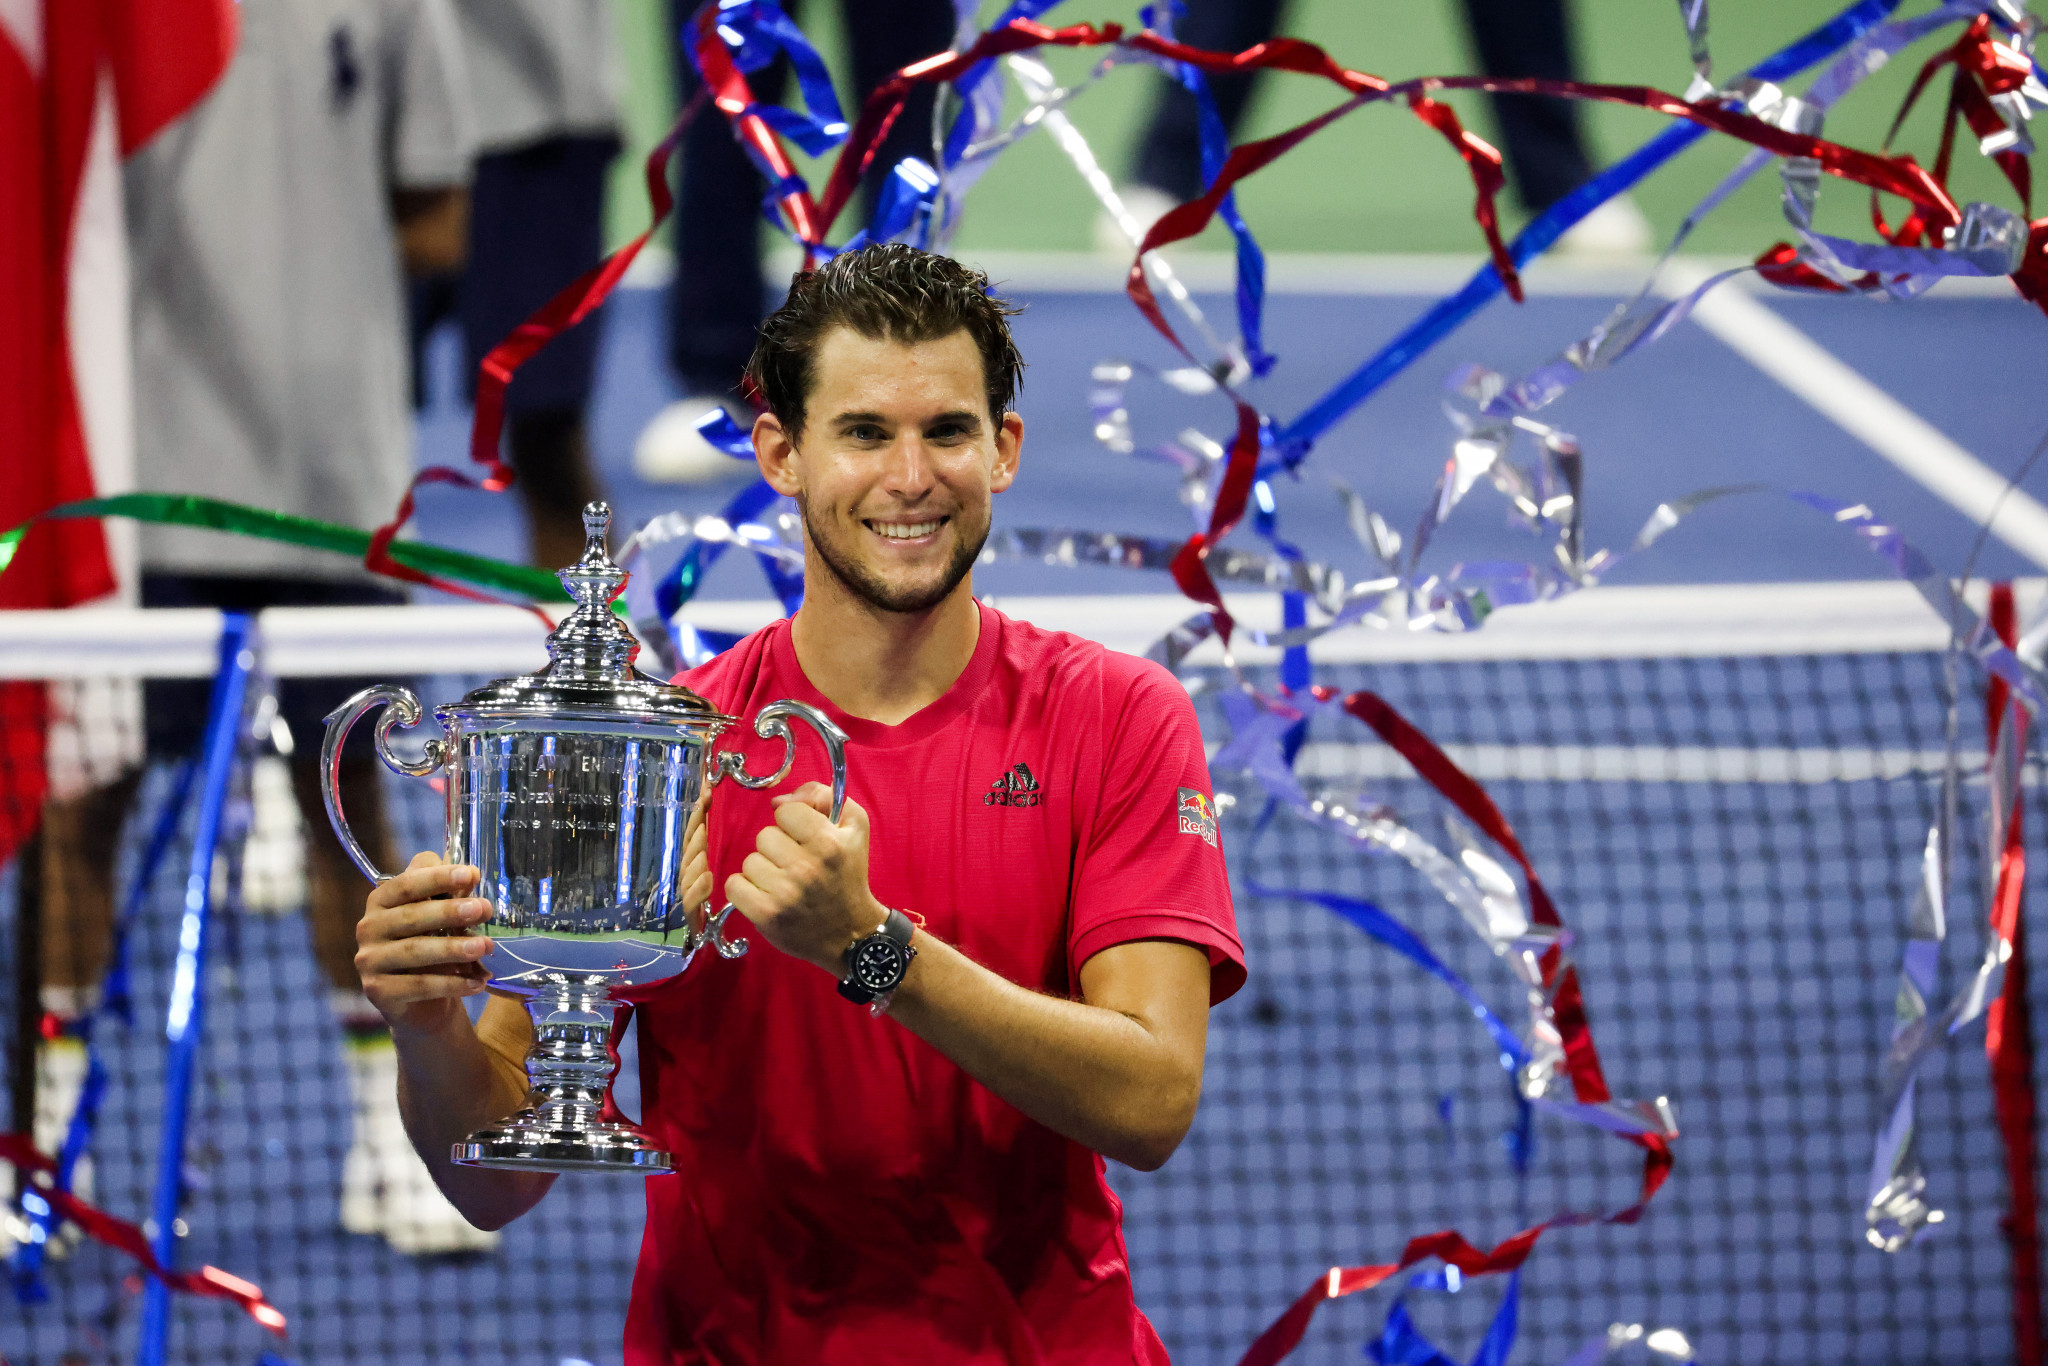 Dominic Thiem claimed his first major title when he defeated Alexander Zverev to win the US Open in September ©Getty Images